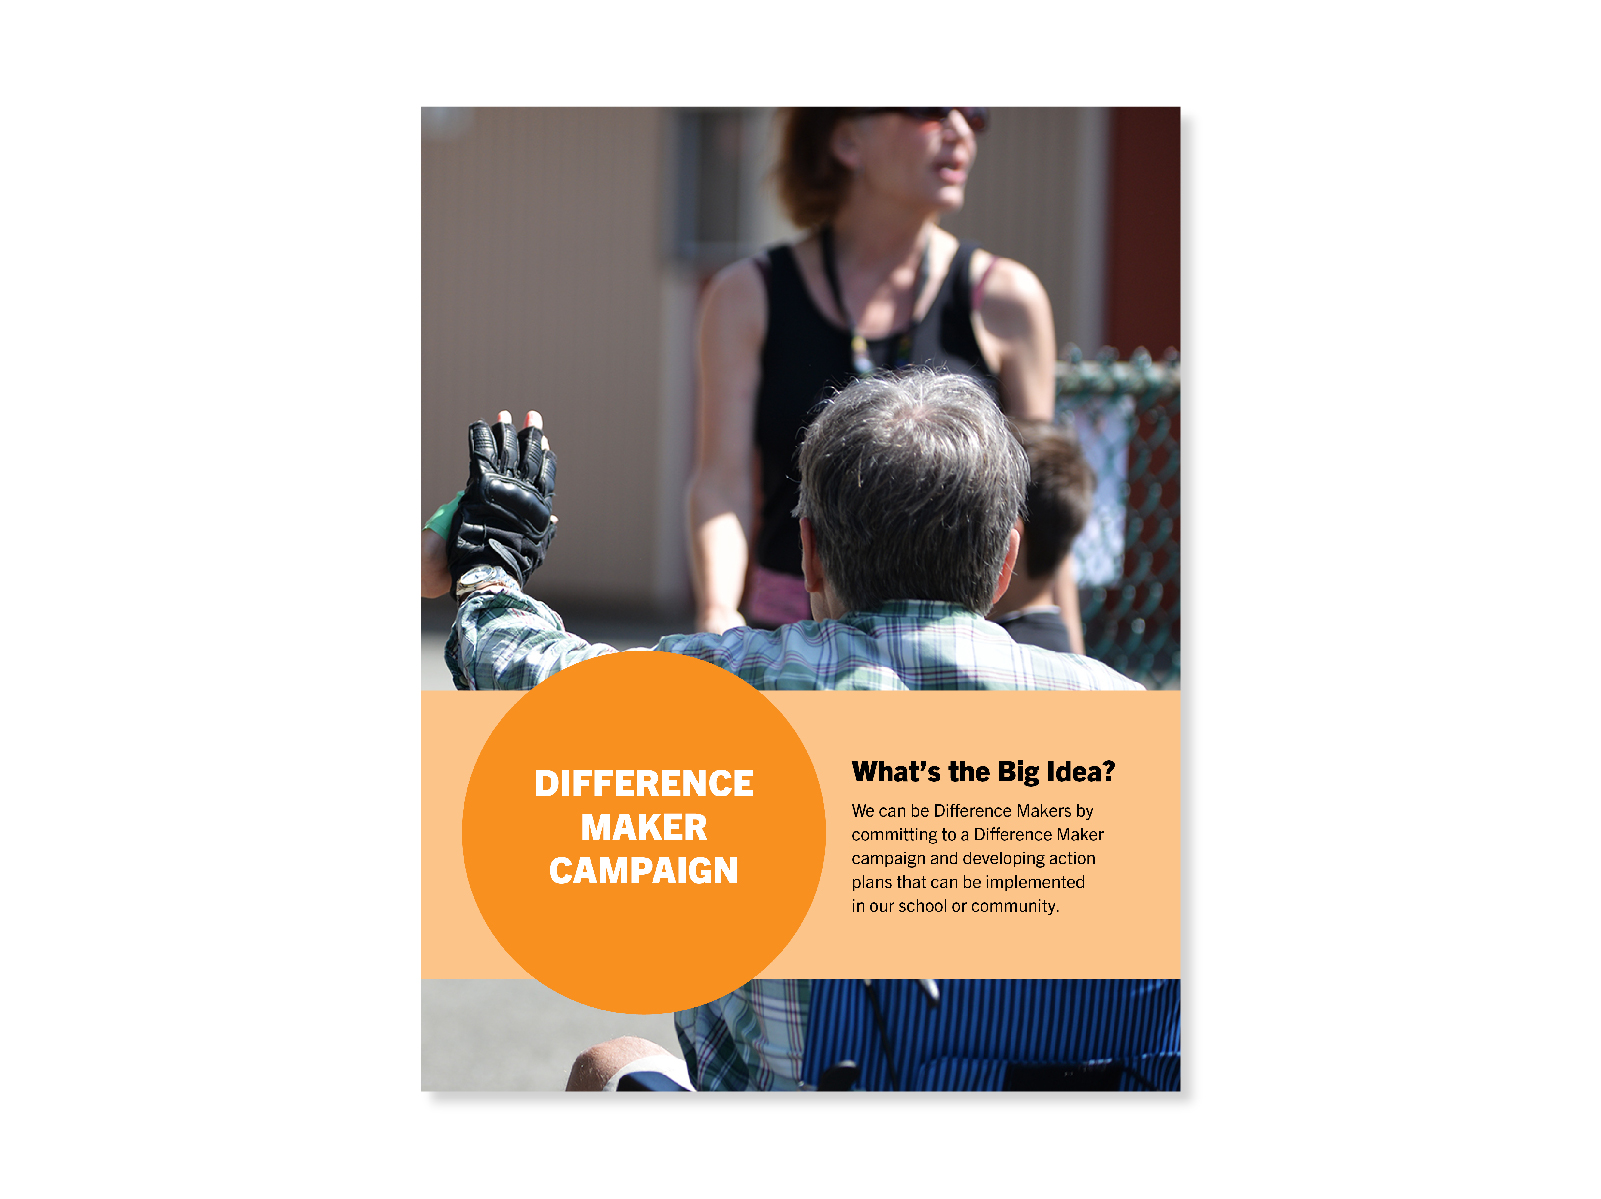 The back of an older man with grey hair, sitting in a wheelchair. In the background a woman and child can be seen in what looks like a school courtyard. Cover for "difference Maker Campaign" lesson.